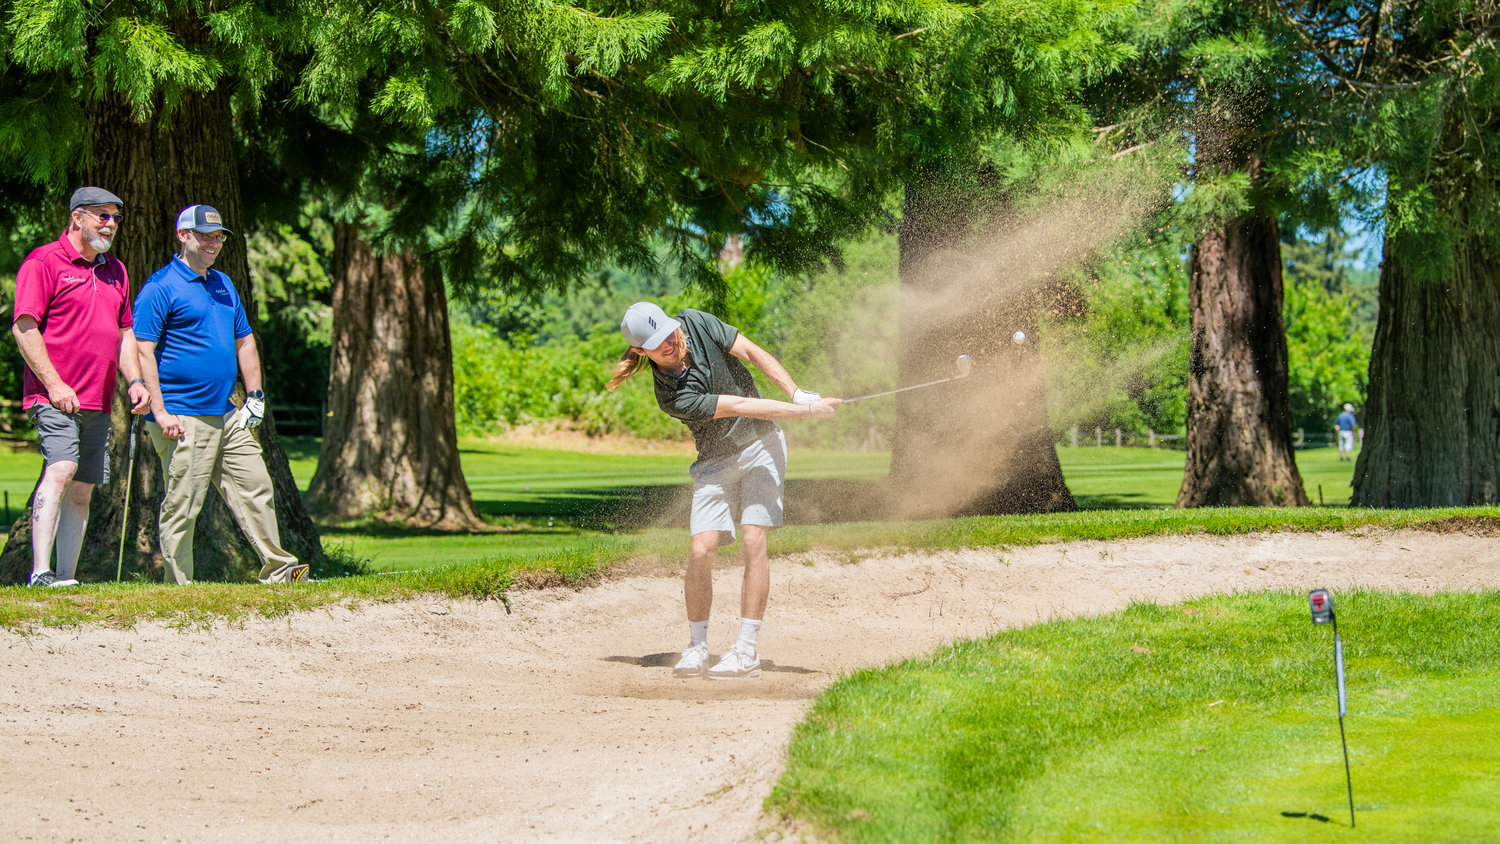 Michael Glasgo smiles as he makes contact with his ball through the sand Friday, during a charity tournament raising money for the Hope Alliance, at Riverside Golf Course in Chehalis.